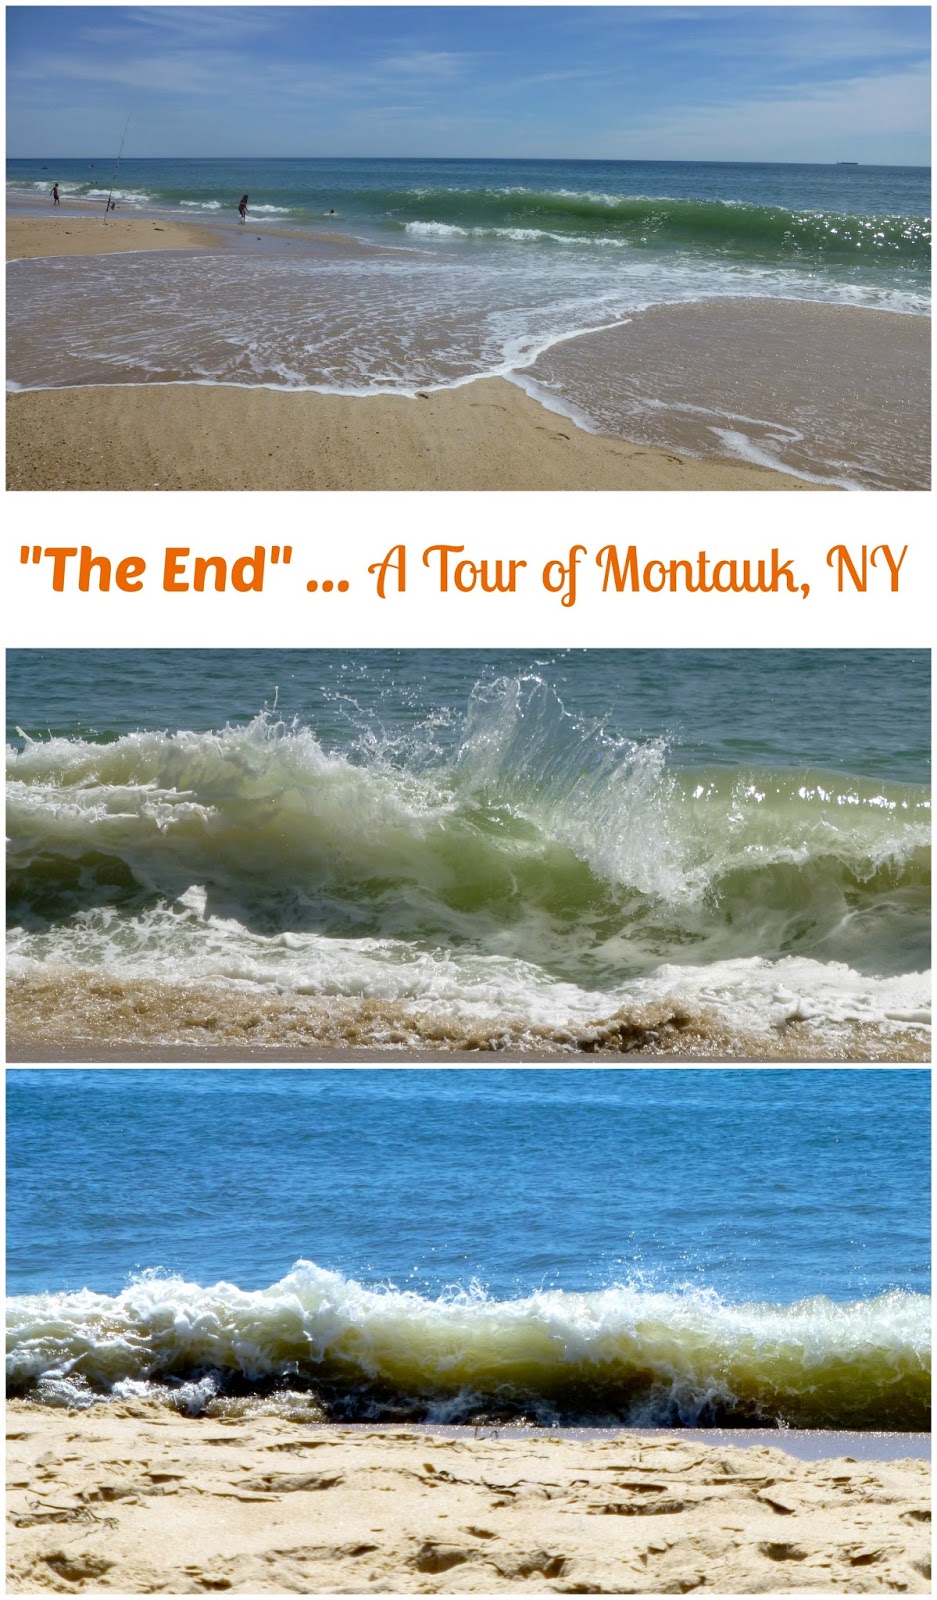 "The End" … A Tour of Montauk NY  by Ms. Toody Goo Shoes